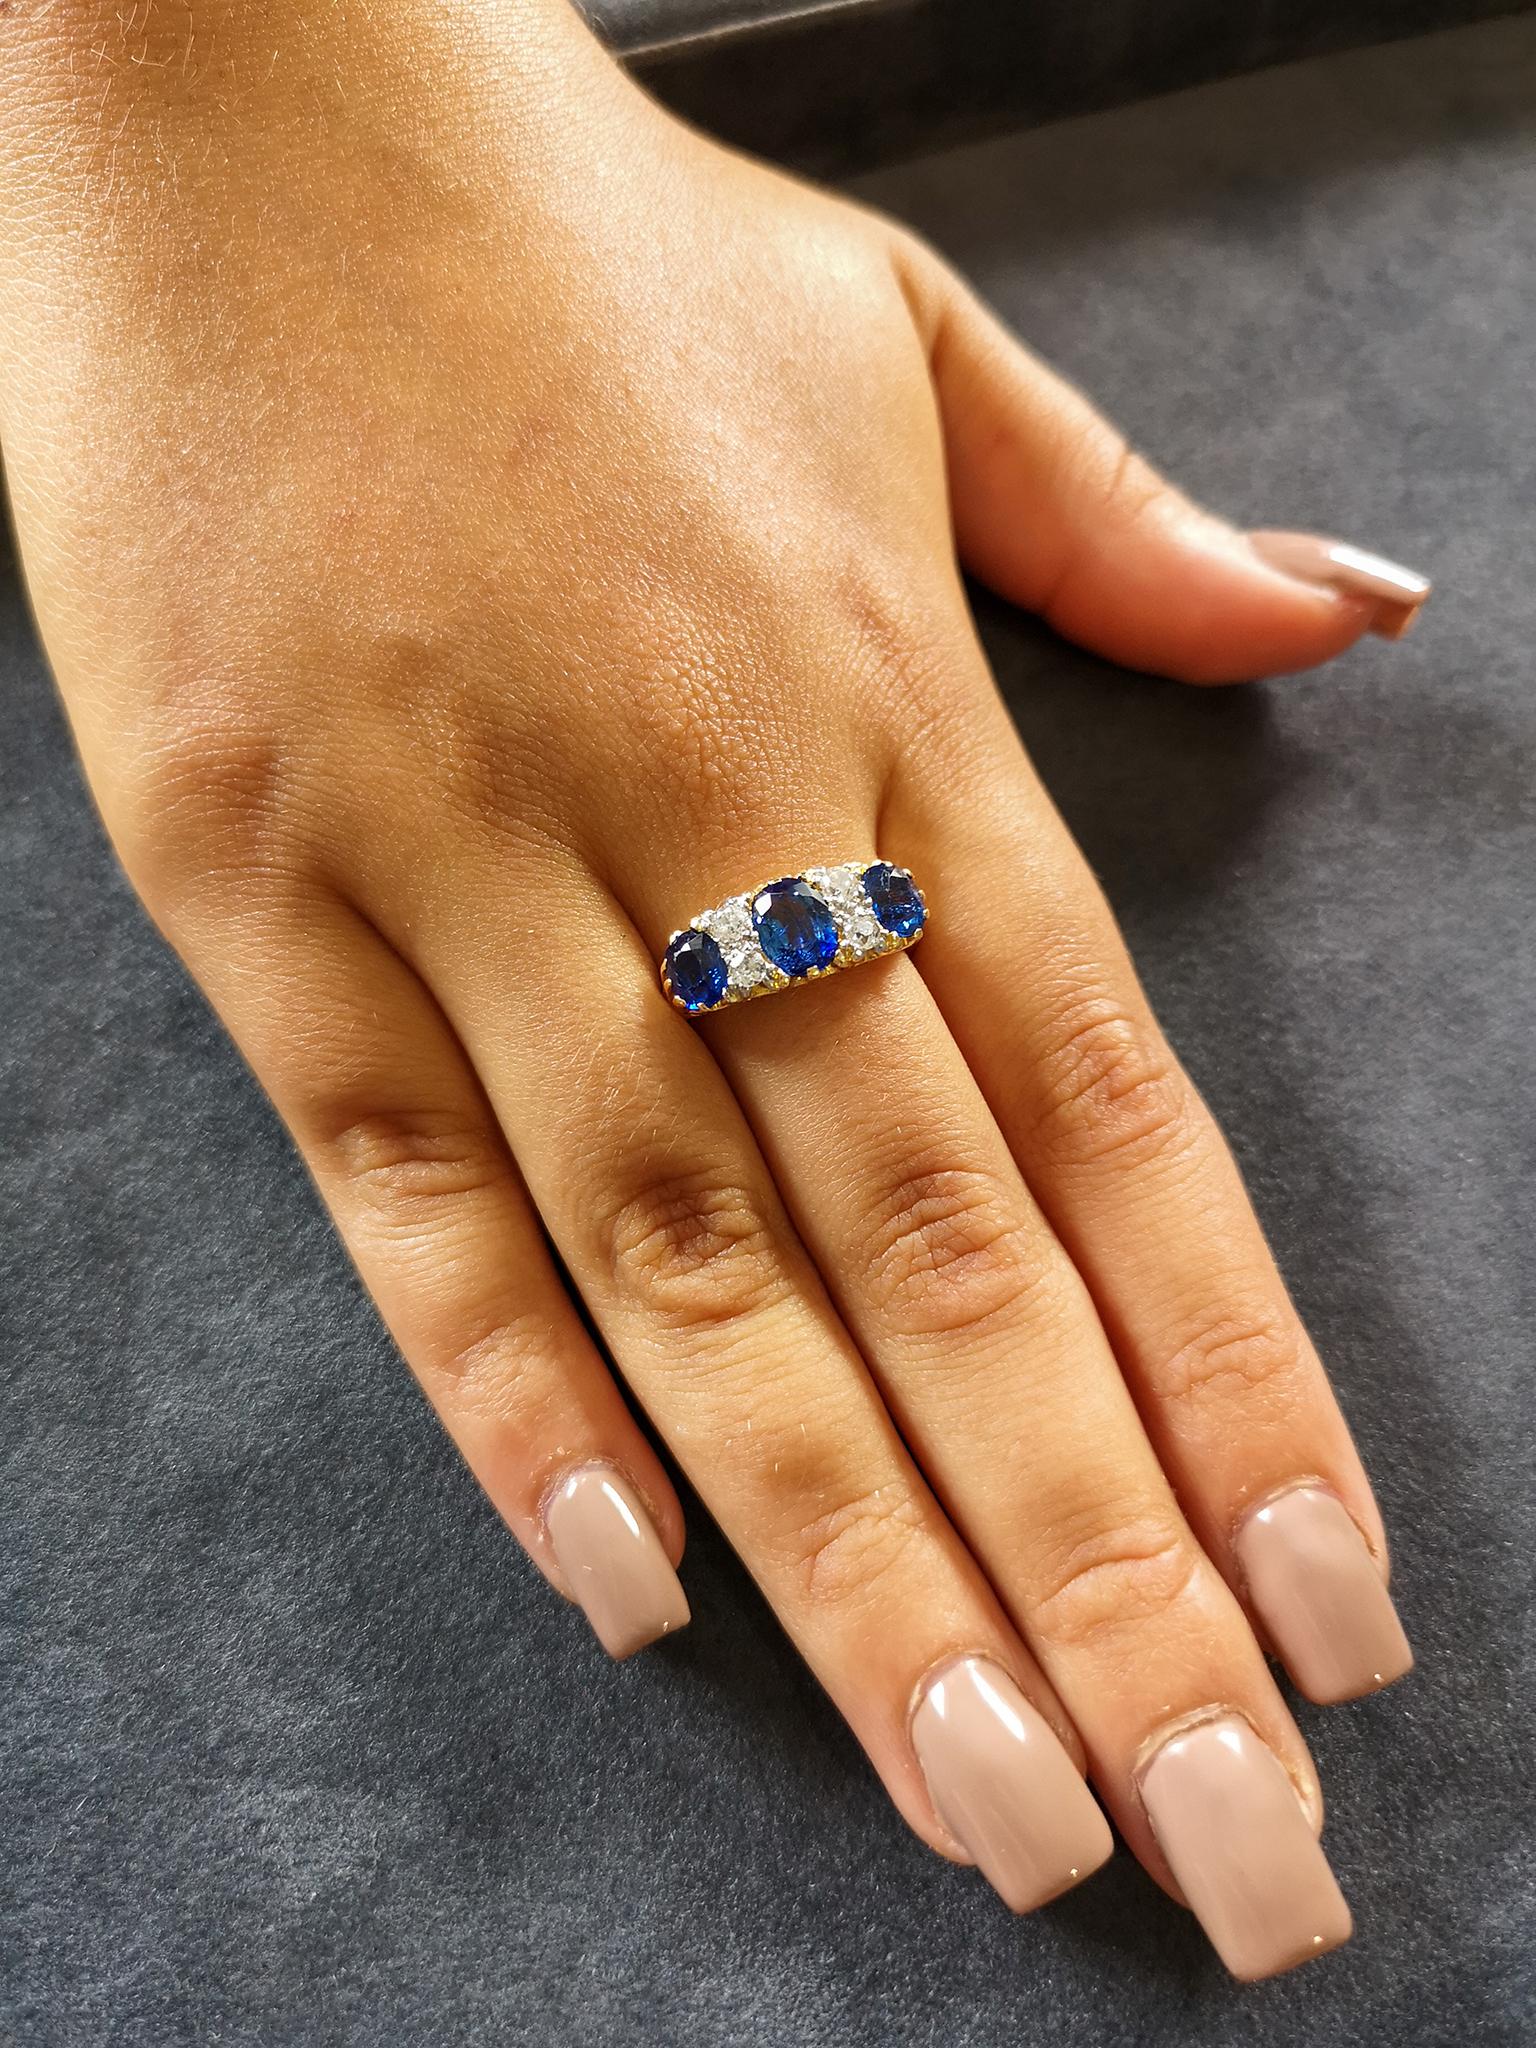 An impressive and very fine quality carved ring, circa 1890. The ornately carved 18-carat yellow gold setting mounted with three oval, inky-blue sapphires totaling approximately 3.00 carats, accented with four old-cut diamonds, mounted in platinum,